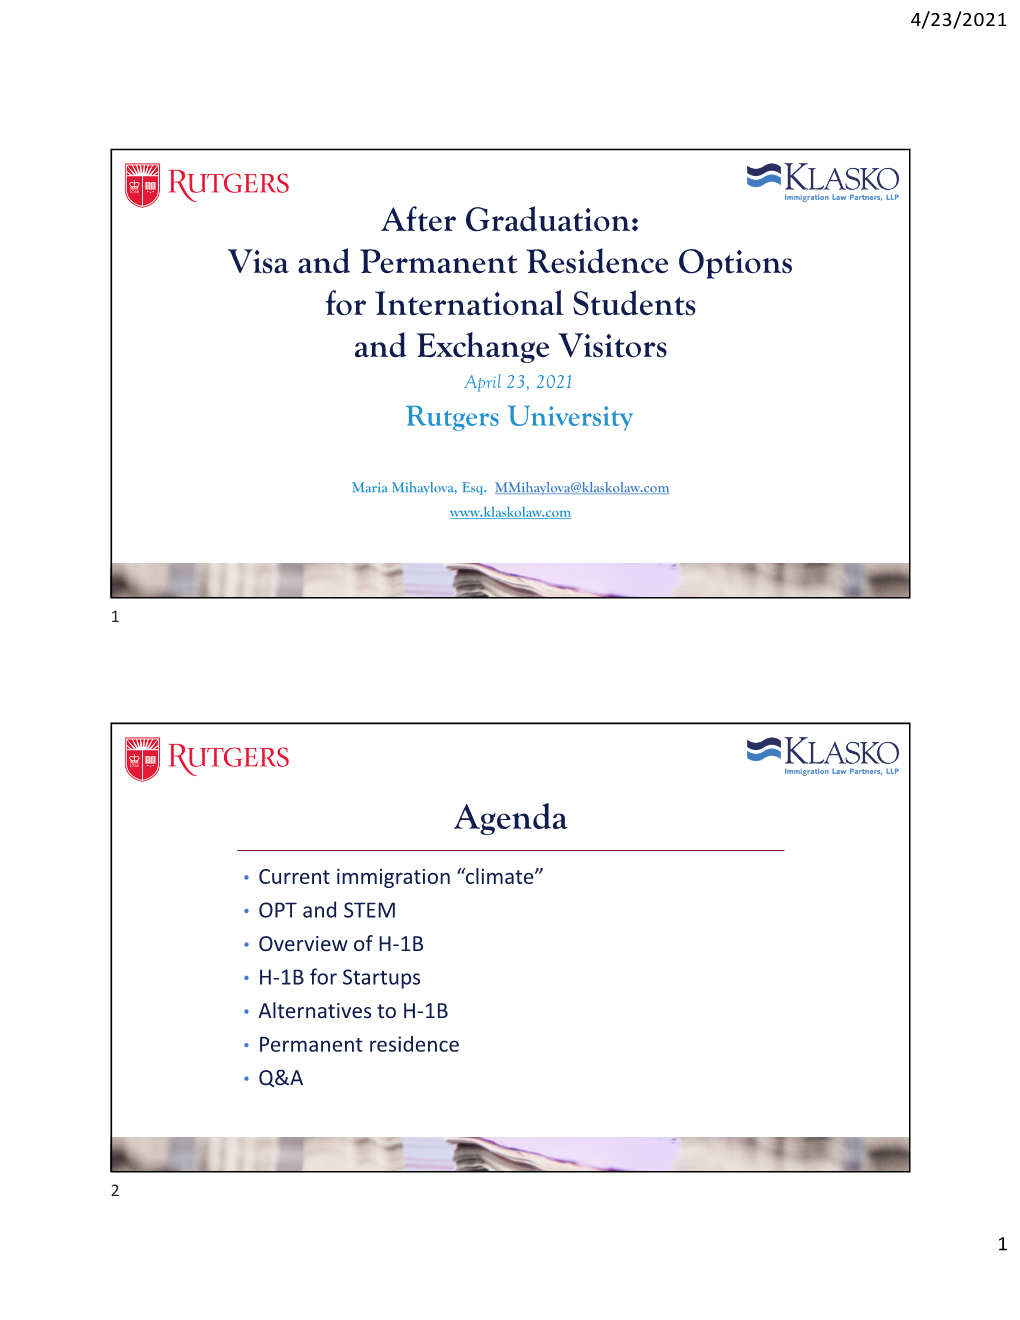 After Graduation: Visa and Permanent Residence Options for International Students and Exchange Visitors April 23, 2021 Rutgers University